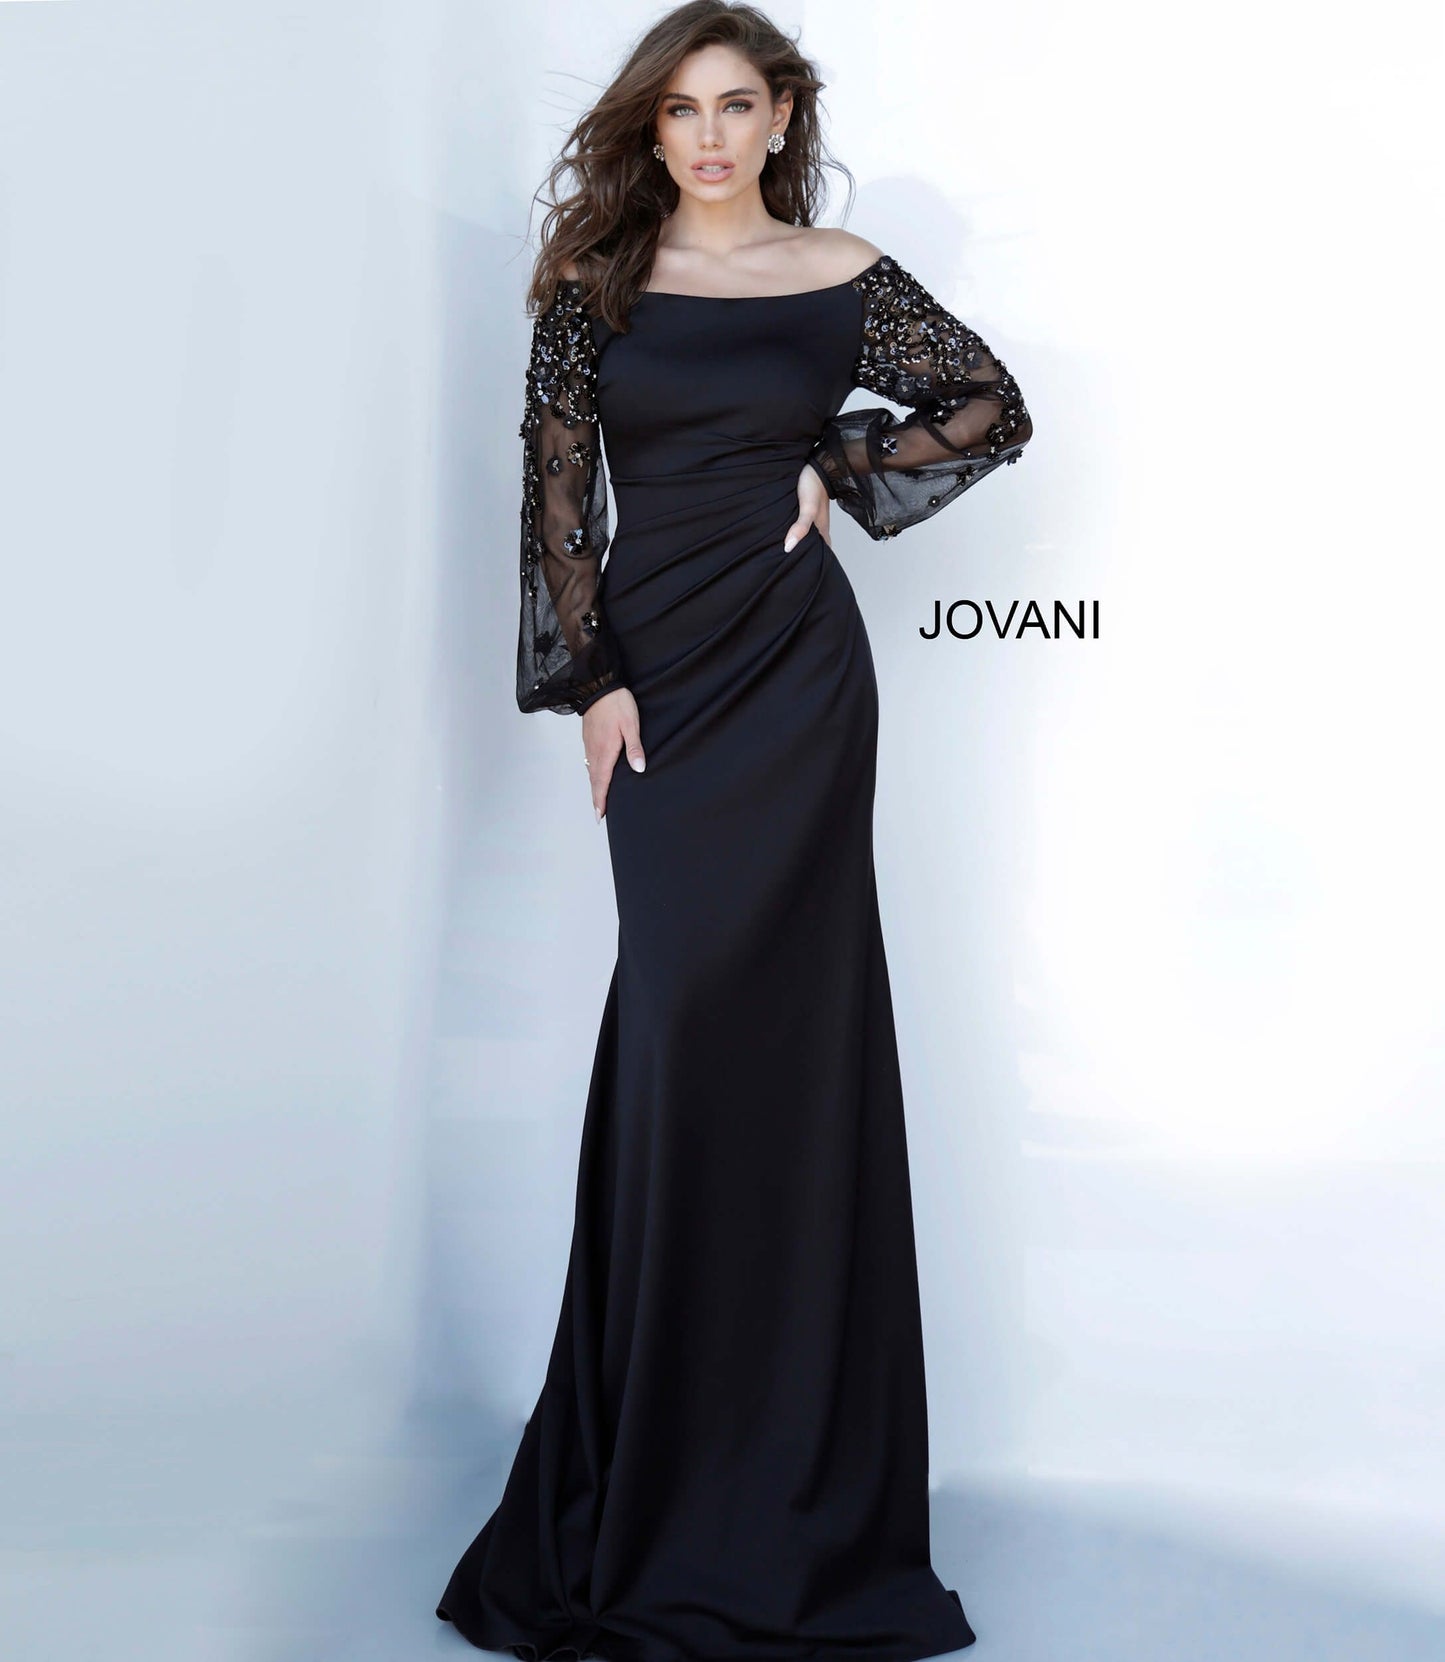 Jovani 1156 off the shoulder long embellished sleeves ruched waistline evening gown  Available colors:  Black  Available sizes:  00-24 